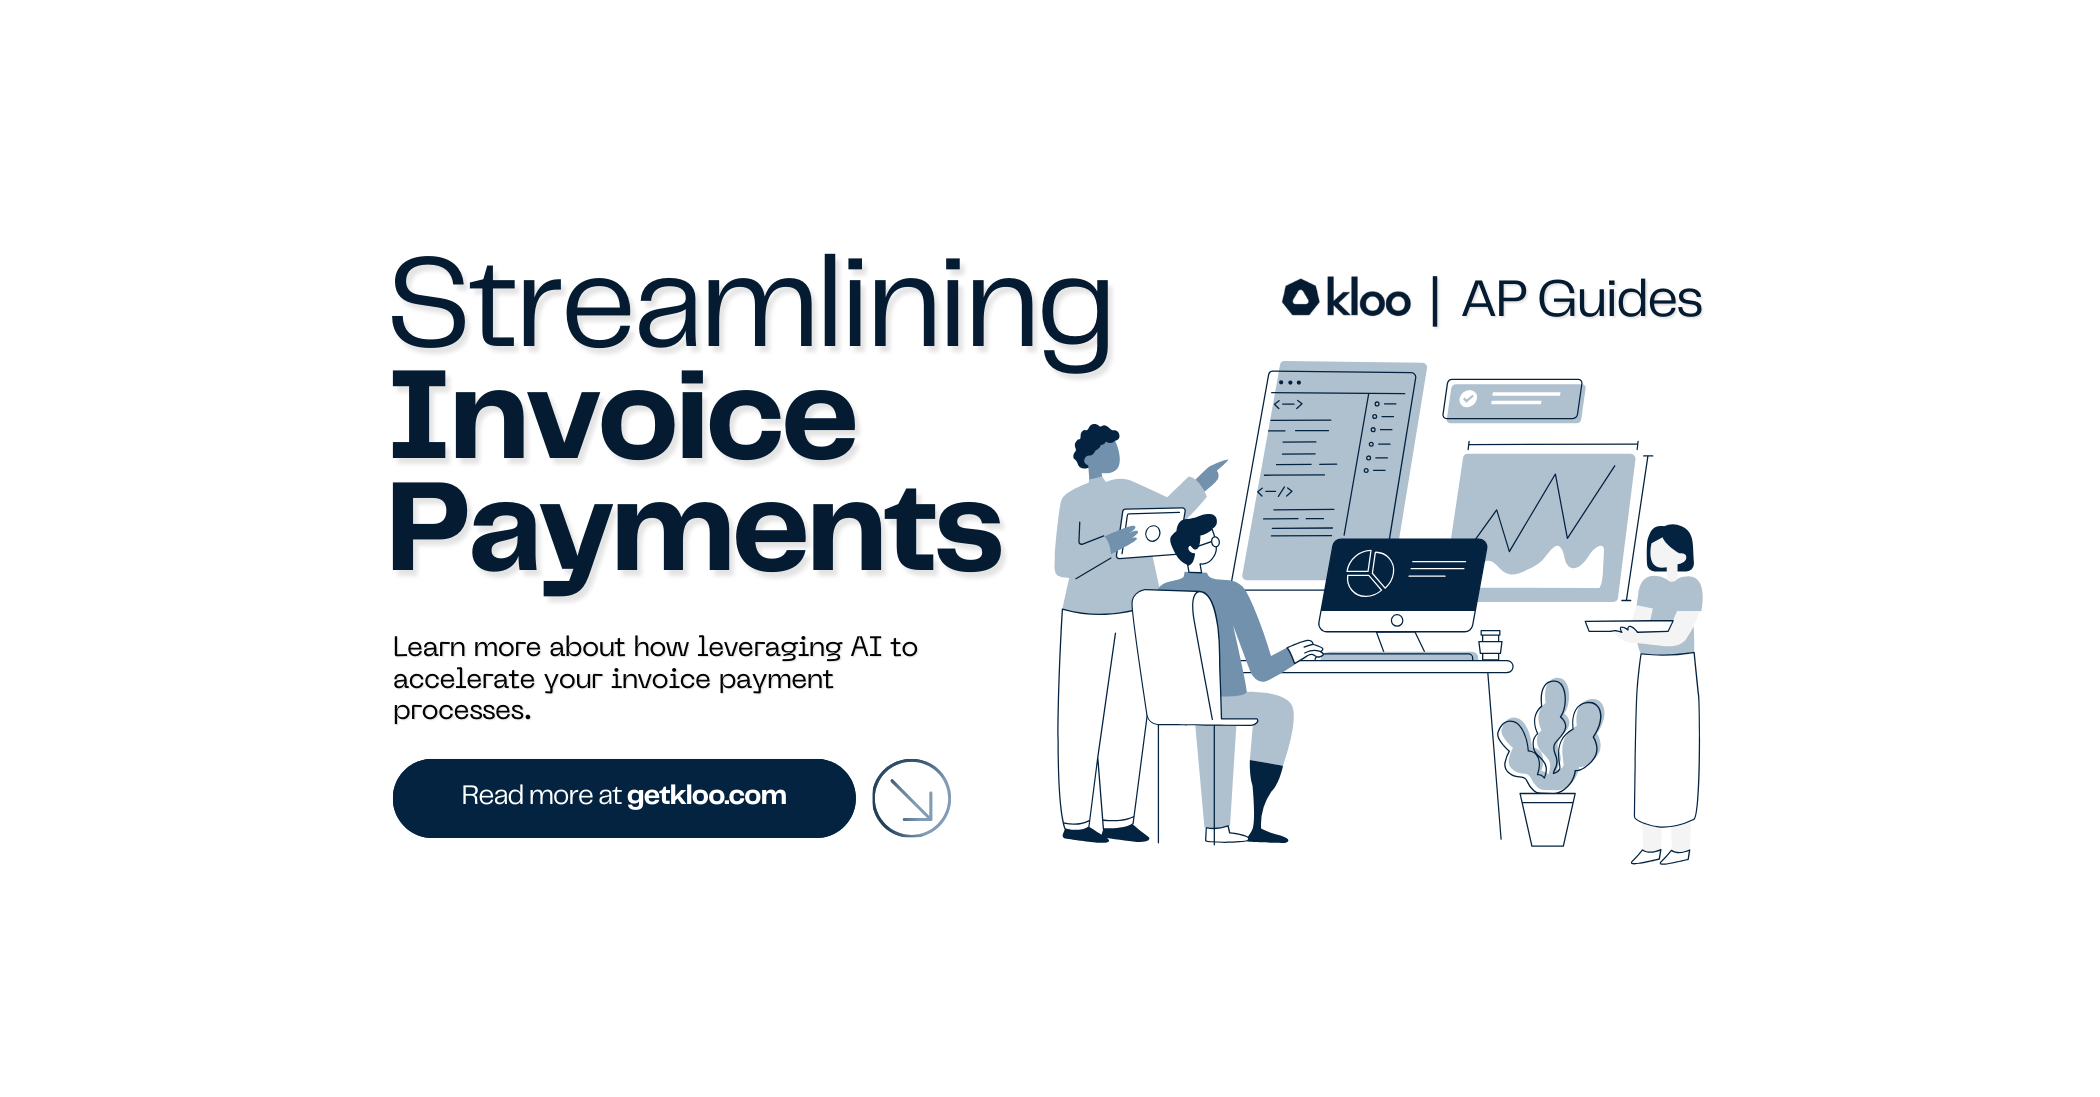 Everything You Need to Know about Streamlining Invoice Payments